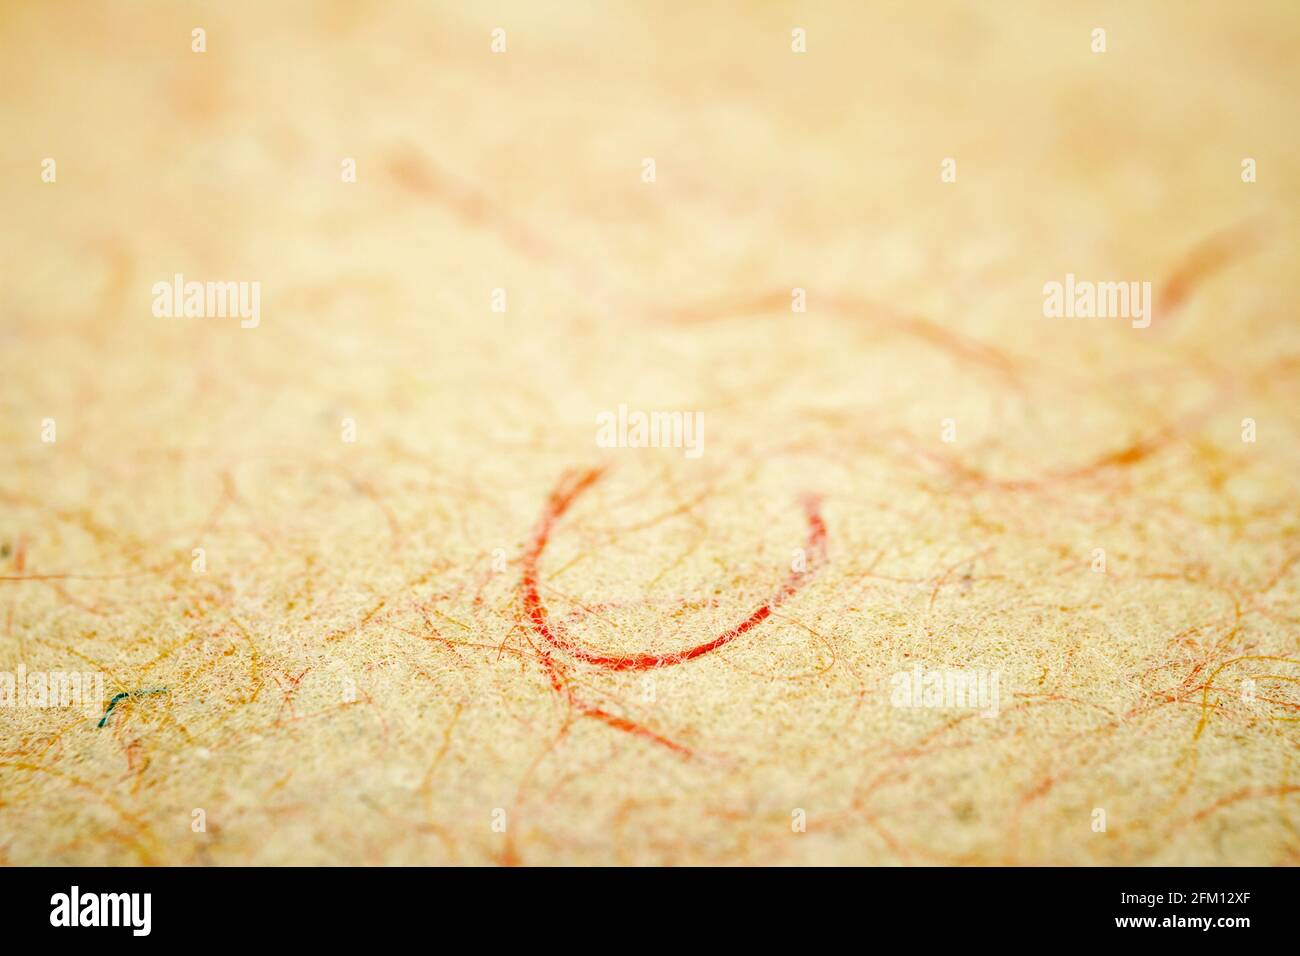 Extreme closeup of yellow handmade paper with shallow deph of field. Stock Photo